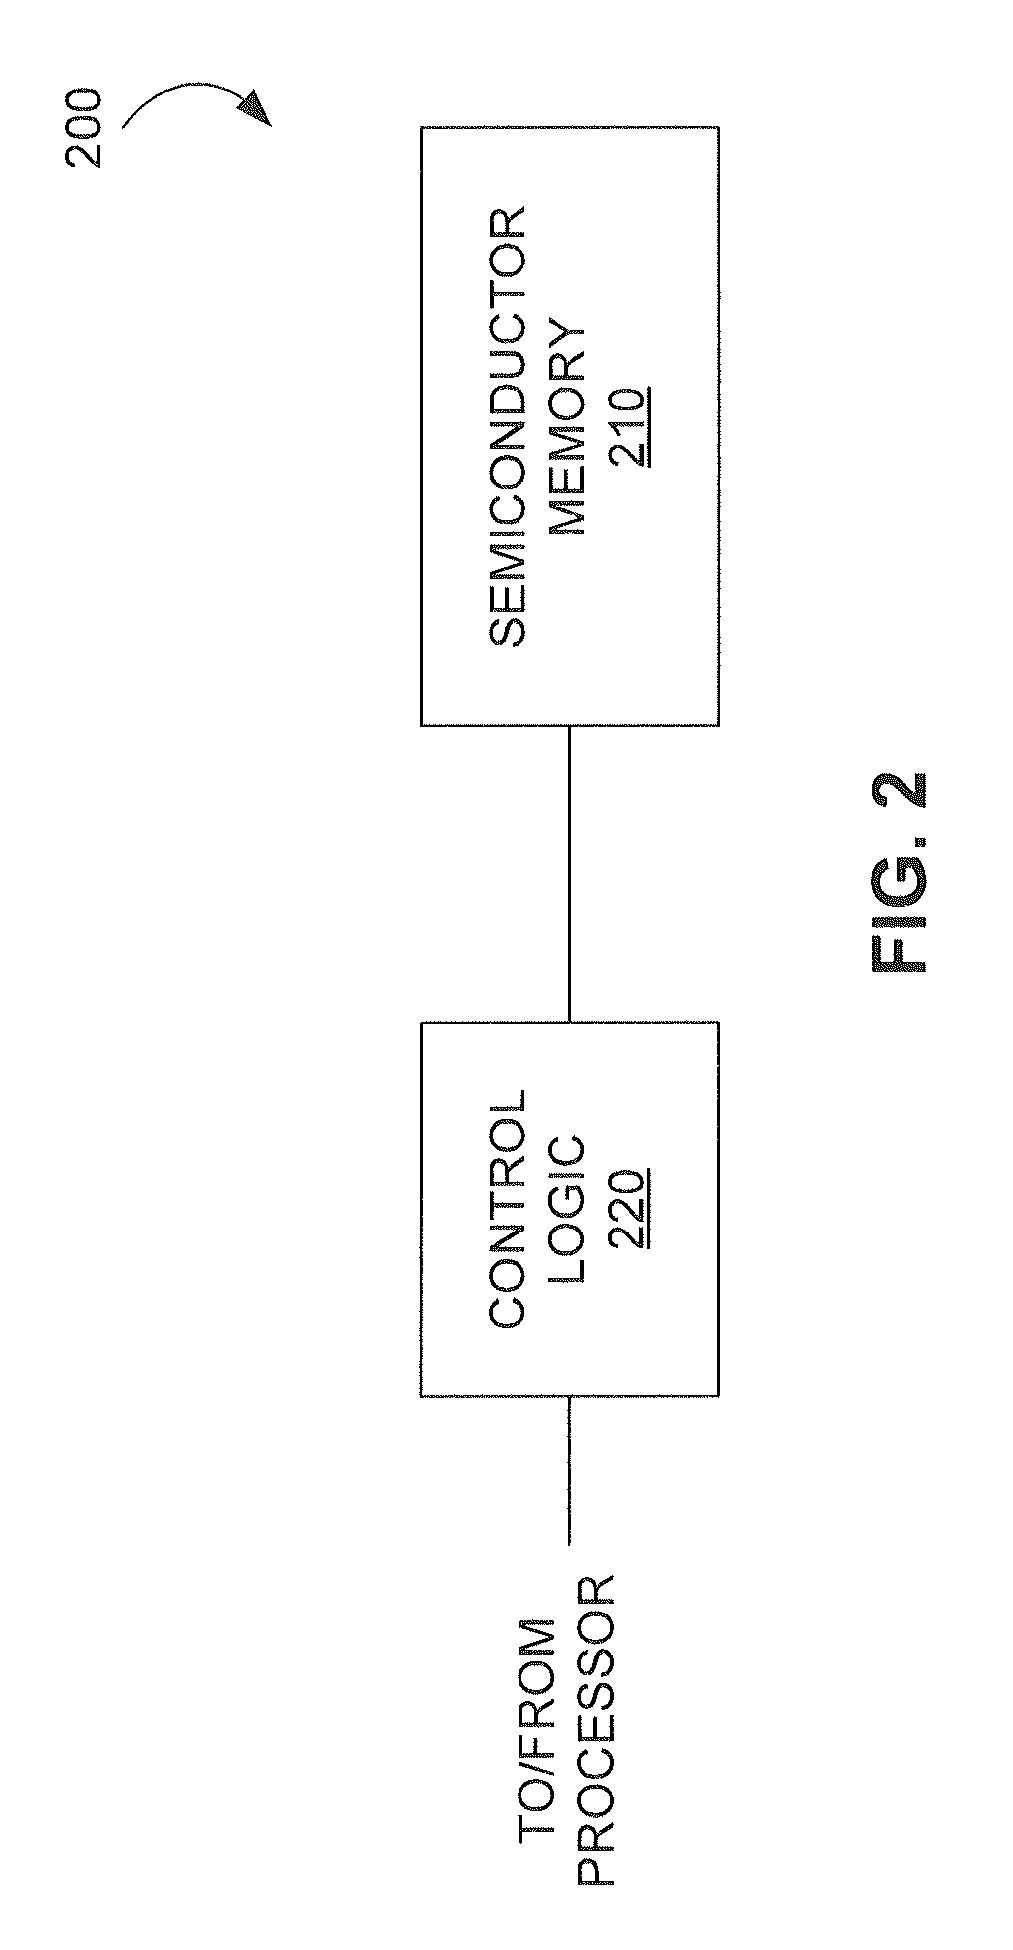 Defect management for a semiconductor memory system